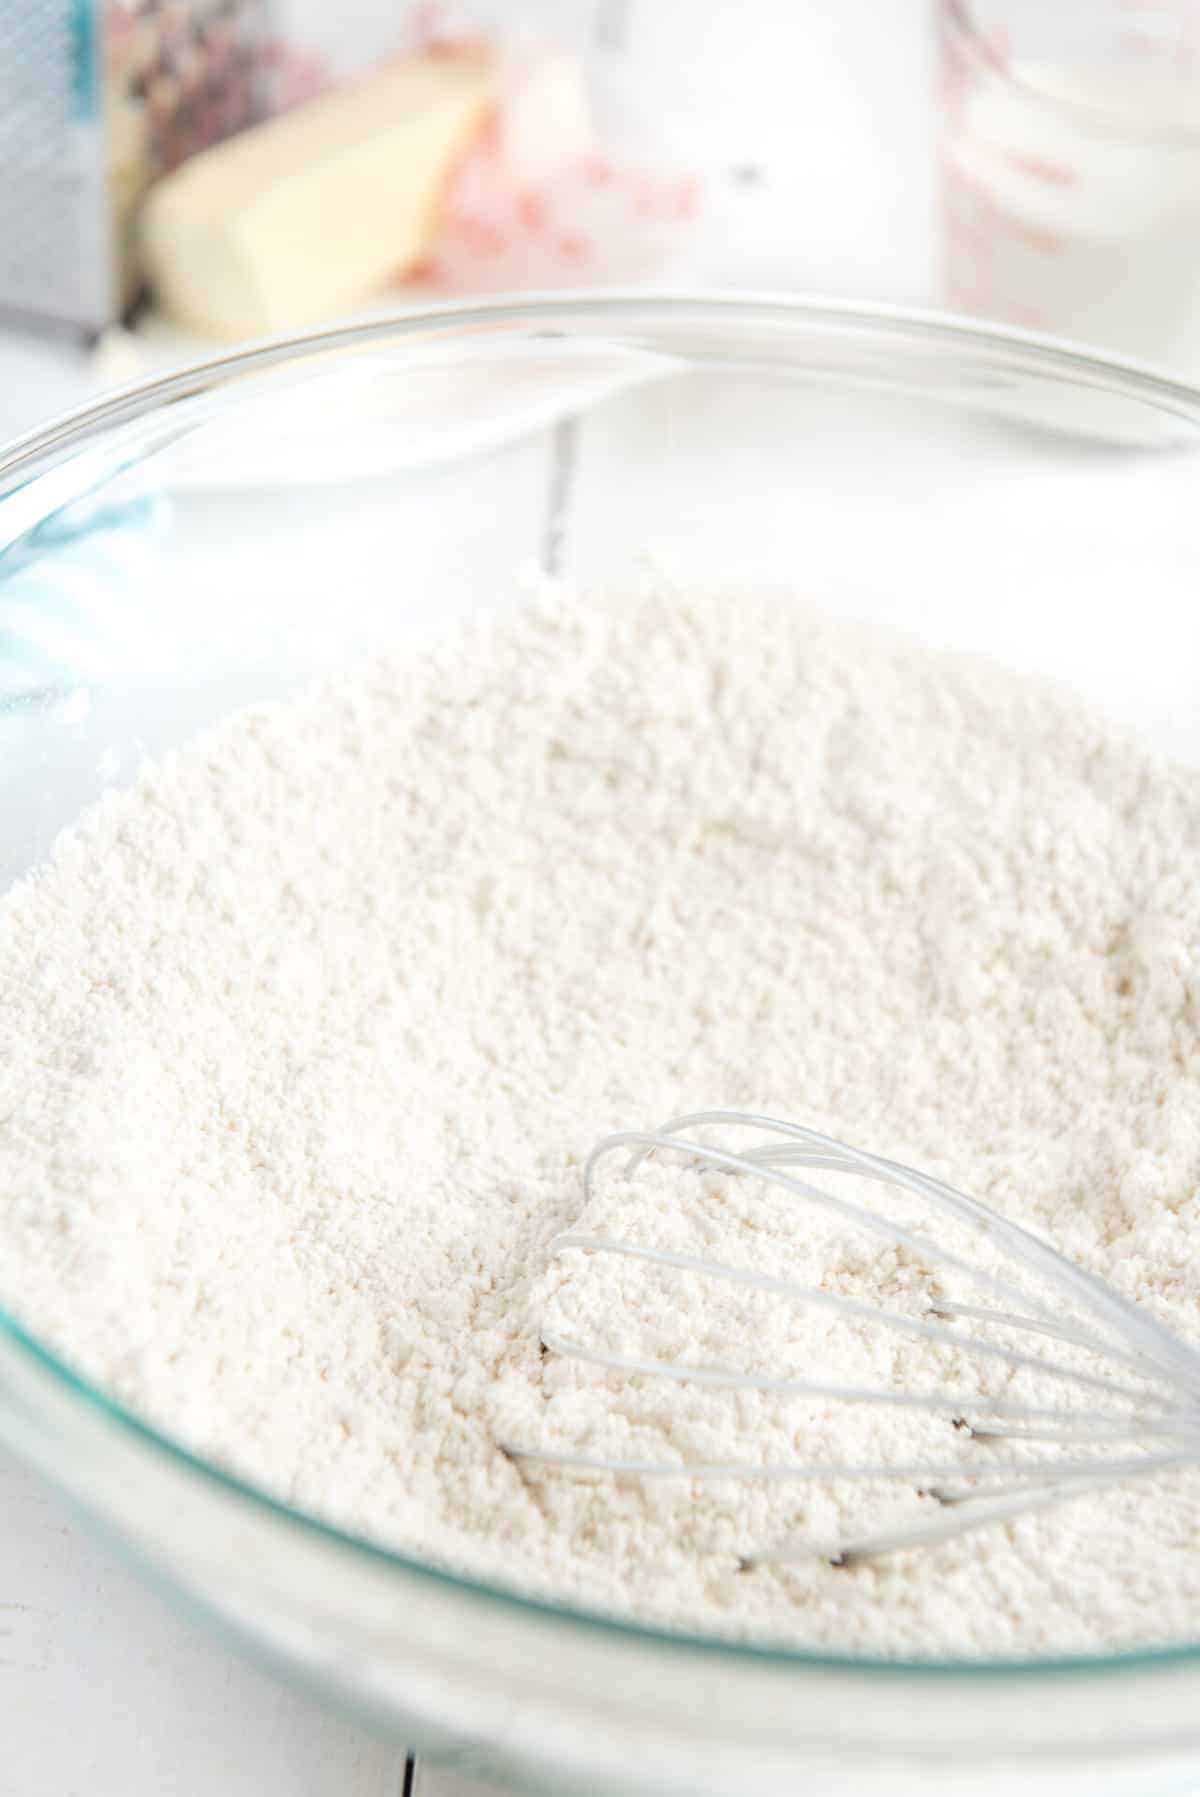 whisking flour in a clear glass mixing bowl